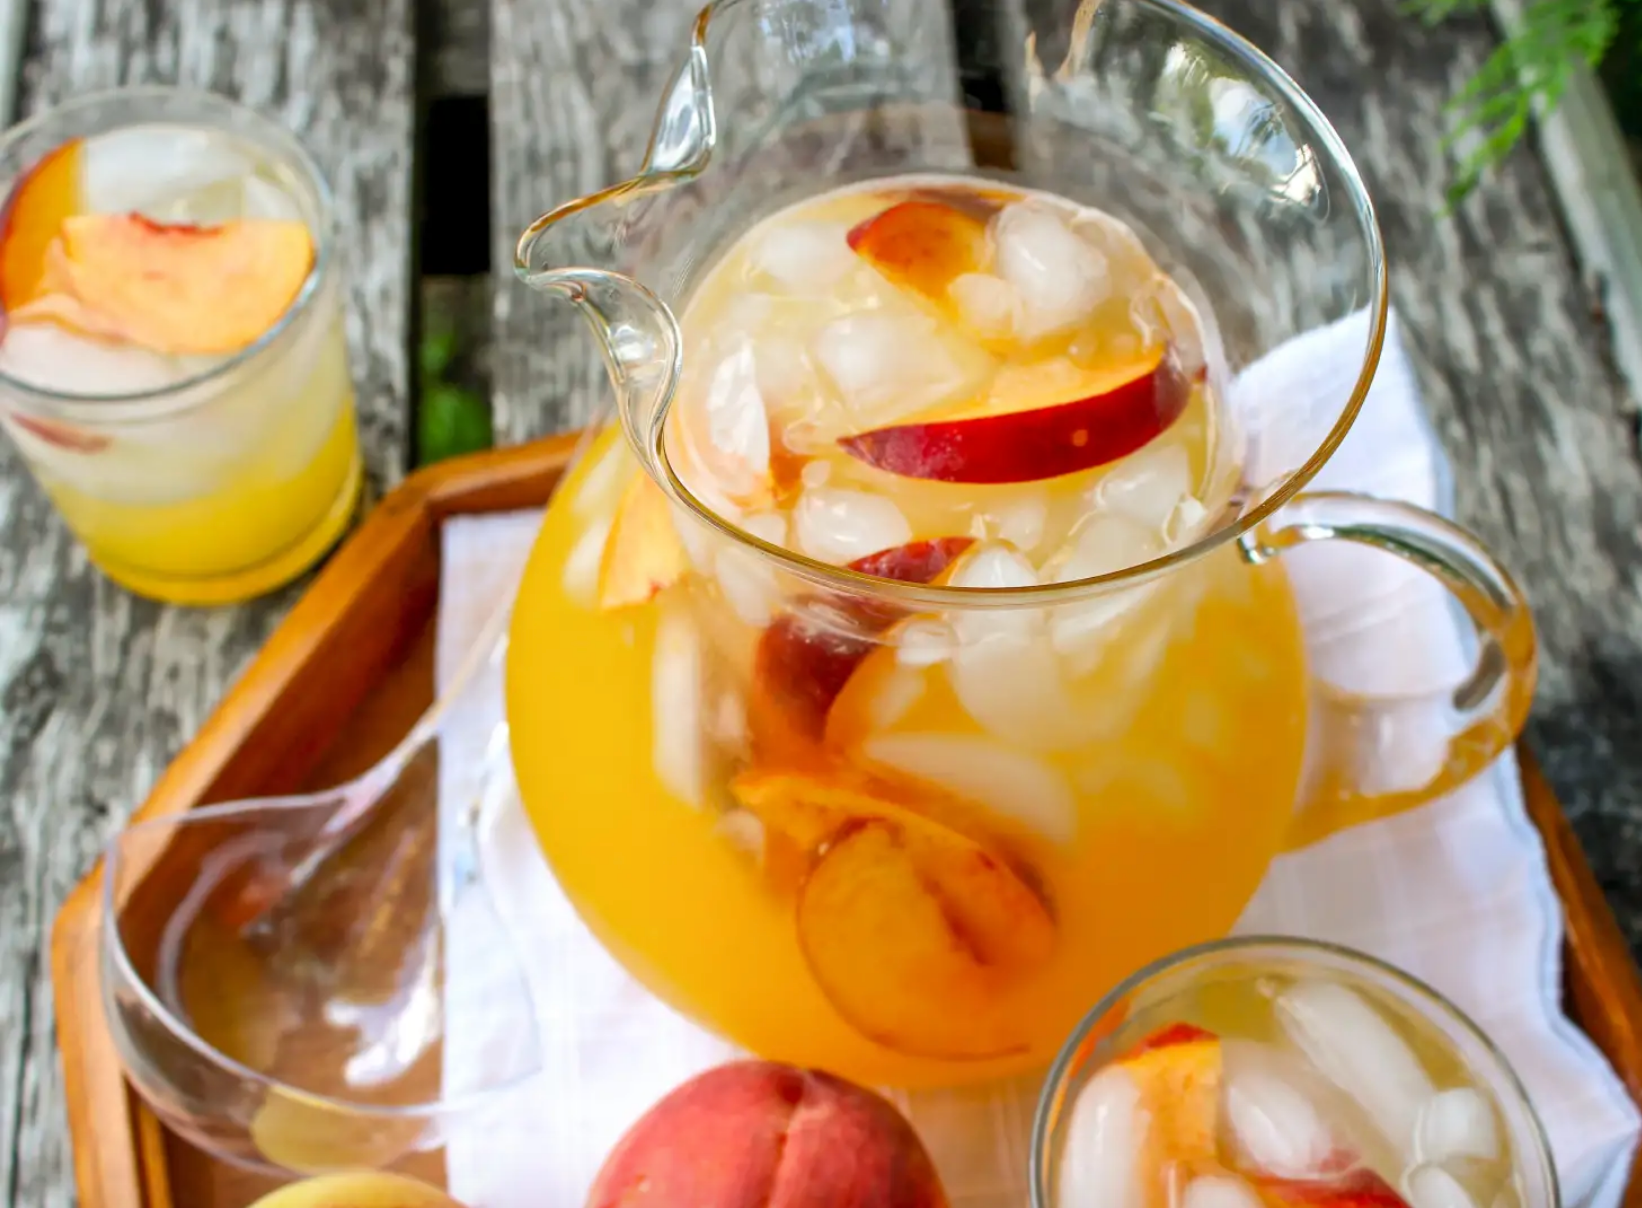 These Alcohol Infused Lemonade Cocktails Are Just What Your Weekend Needs